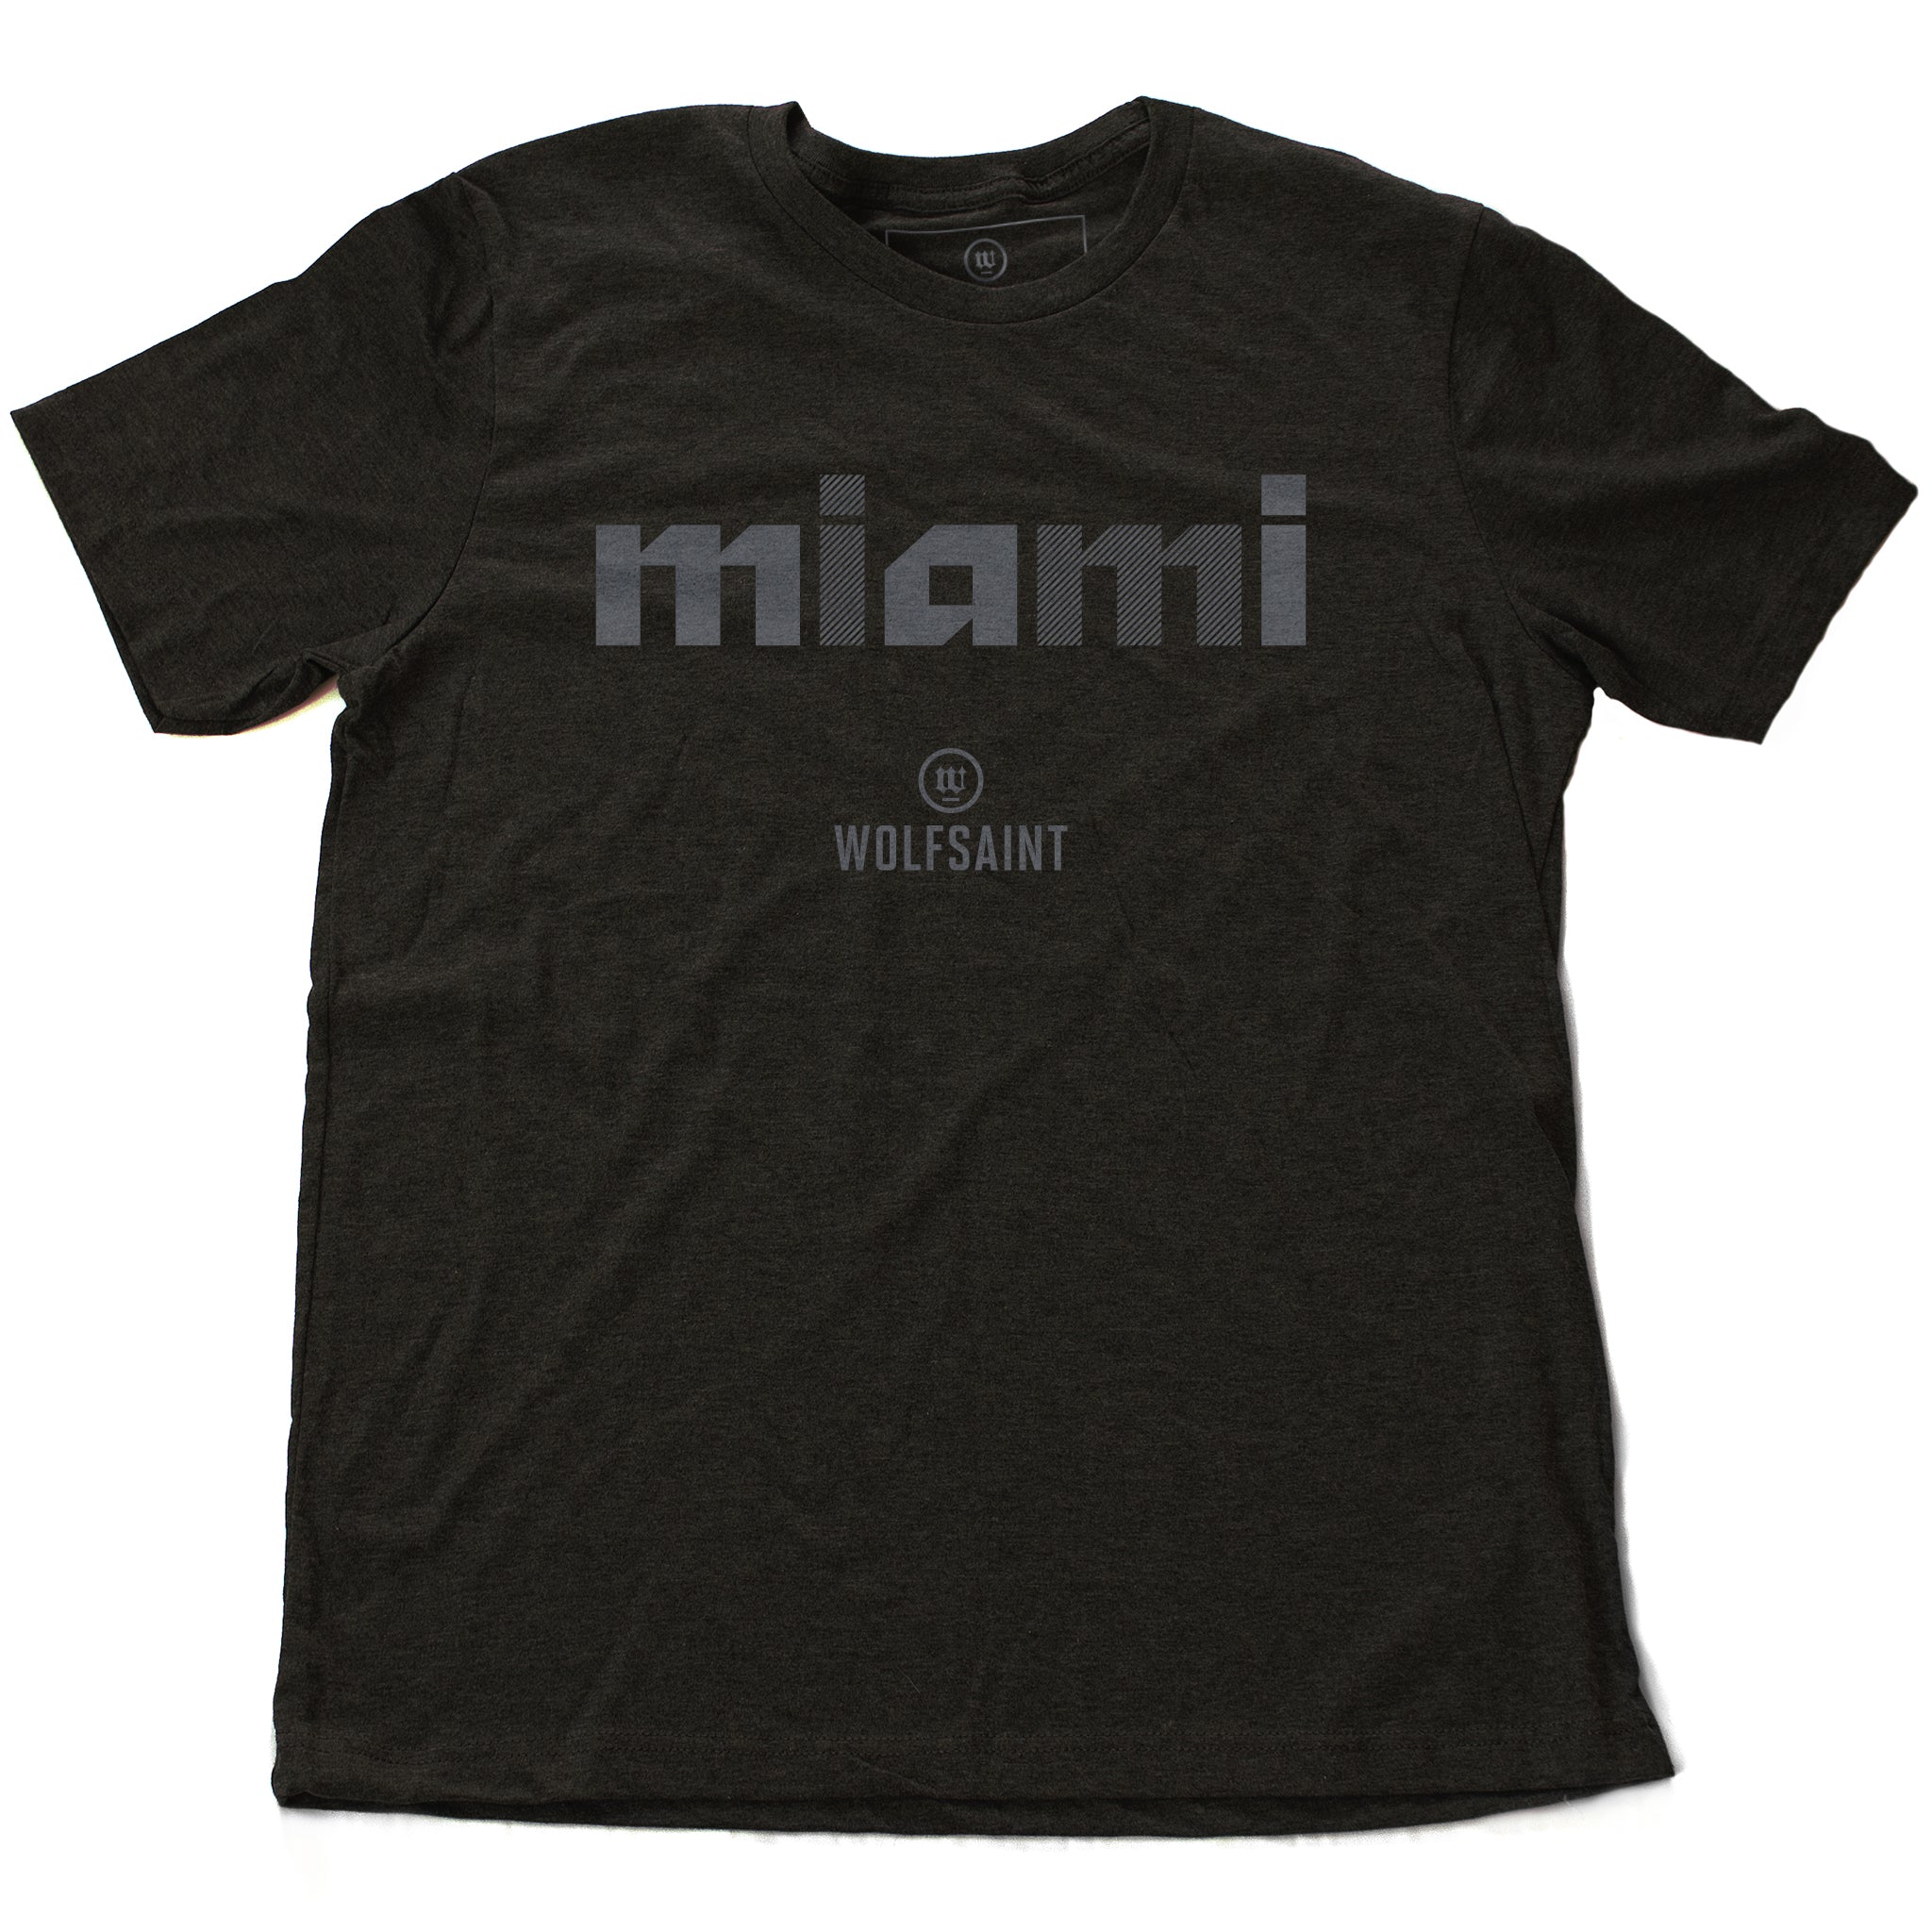 A stylish fashion-shirt in Dark Gray Heather, with a graphic modern typographic treatment of “miami” in Gray crosshatched lowercase letters, with the Wolfsaint logo beneath it. From wolfsaint.net